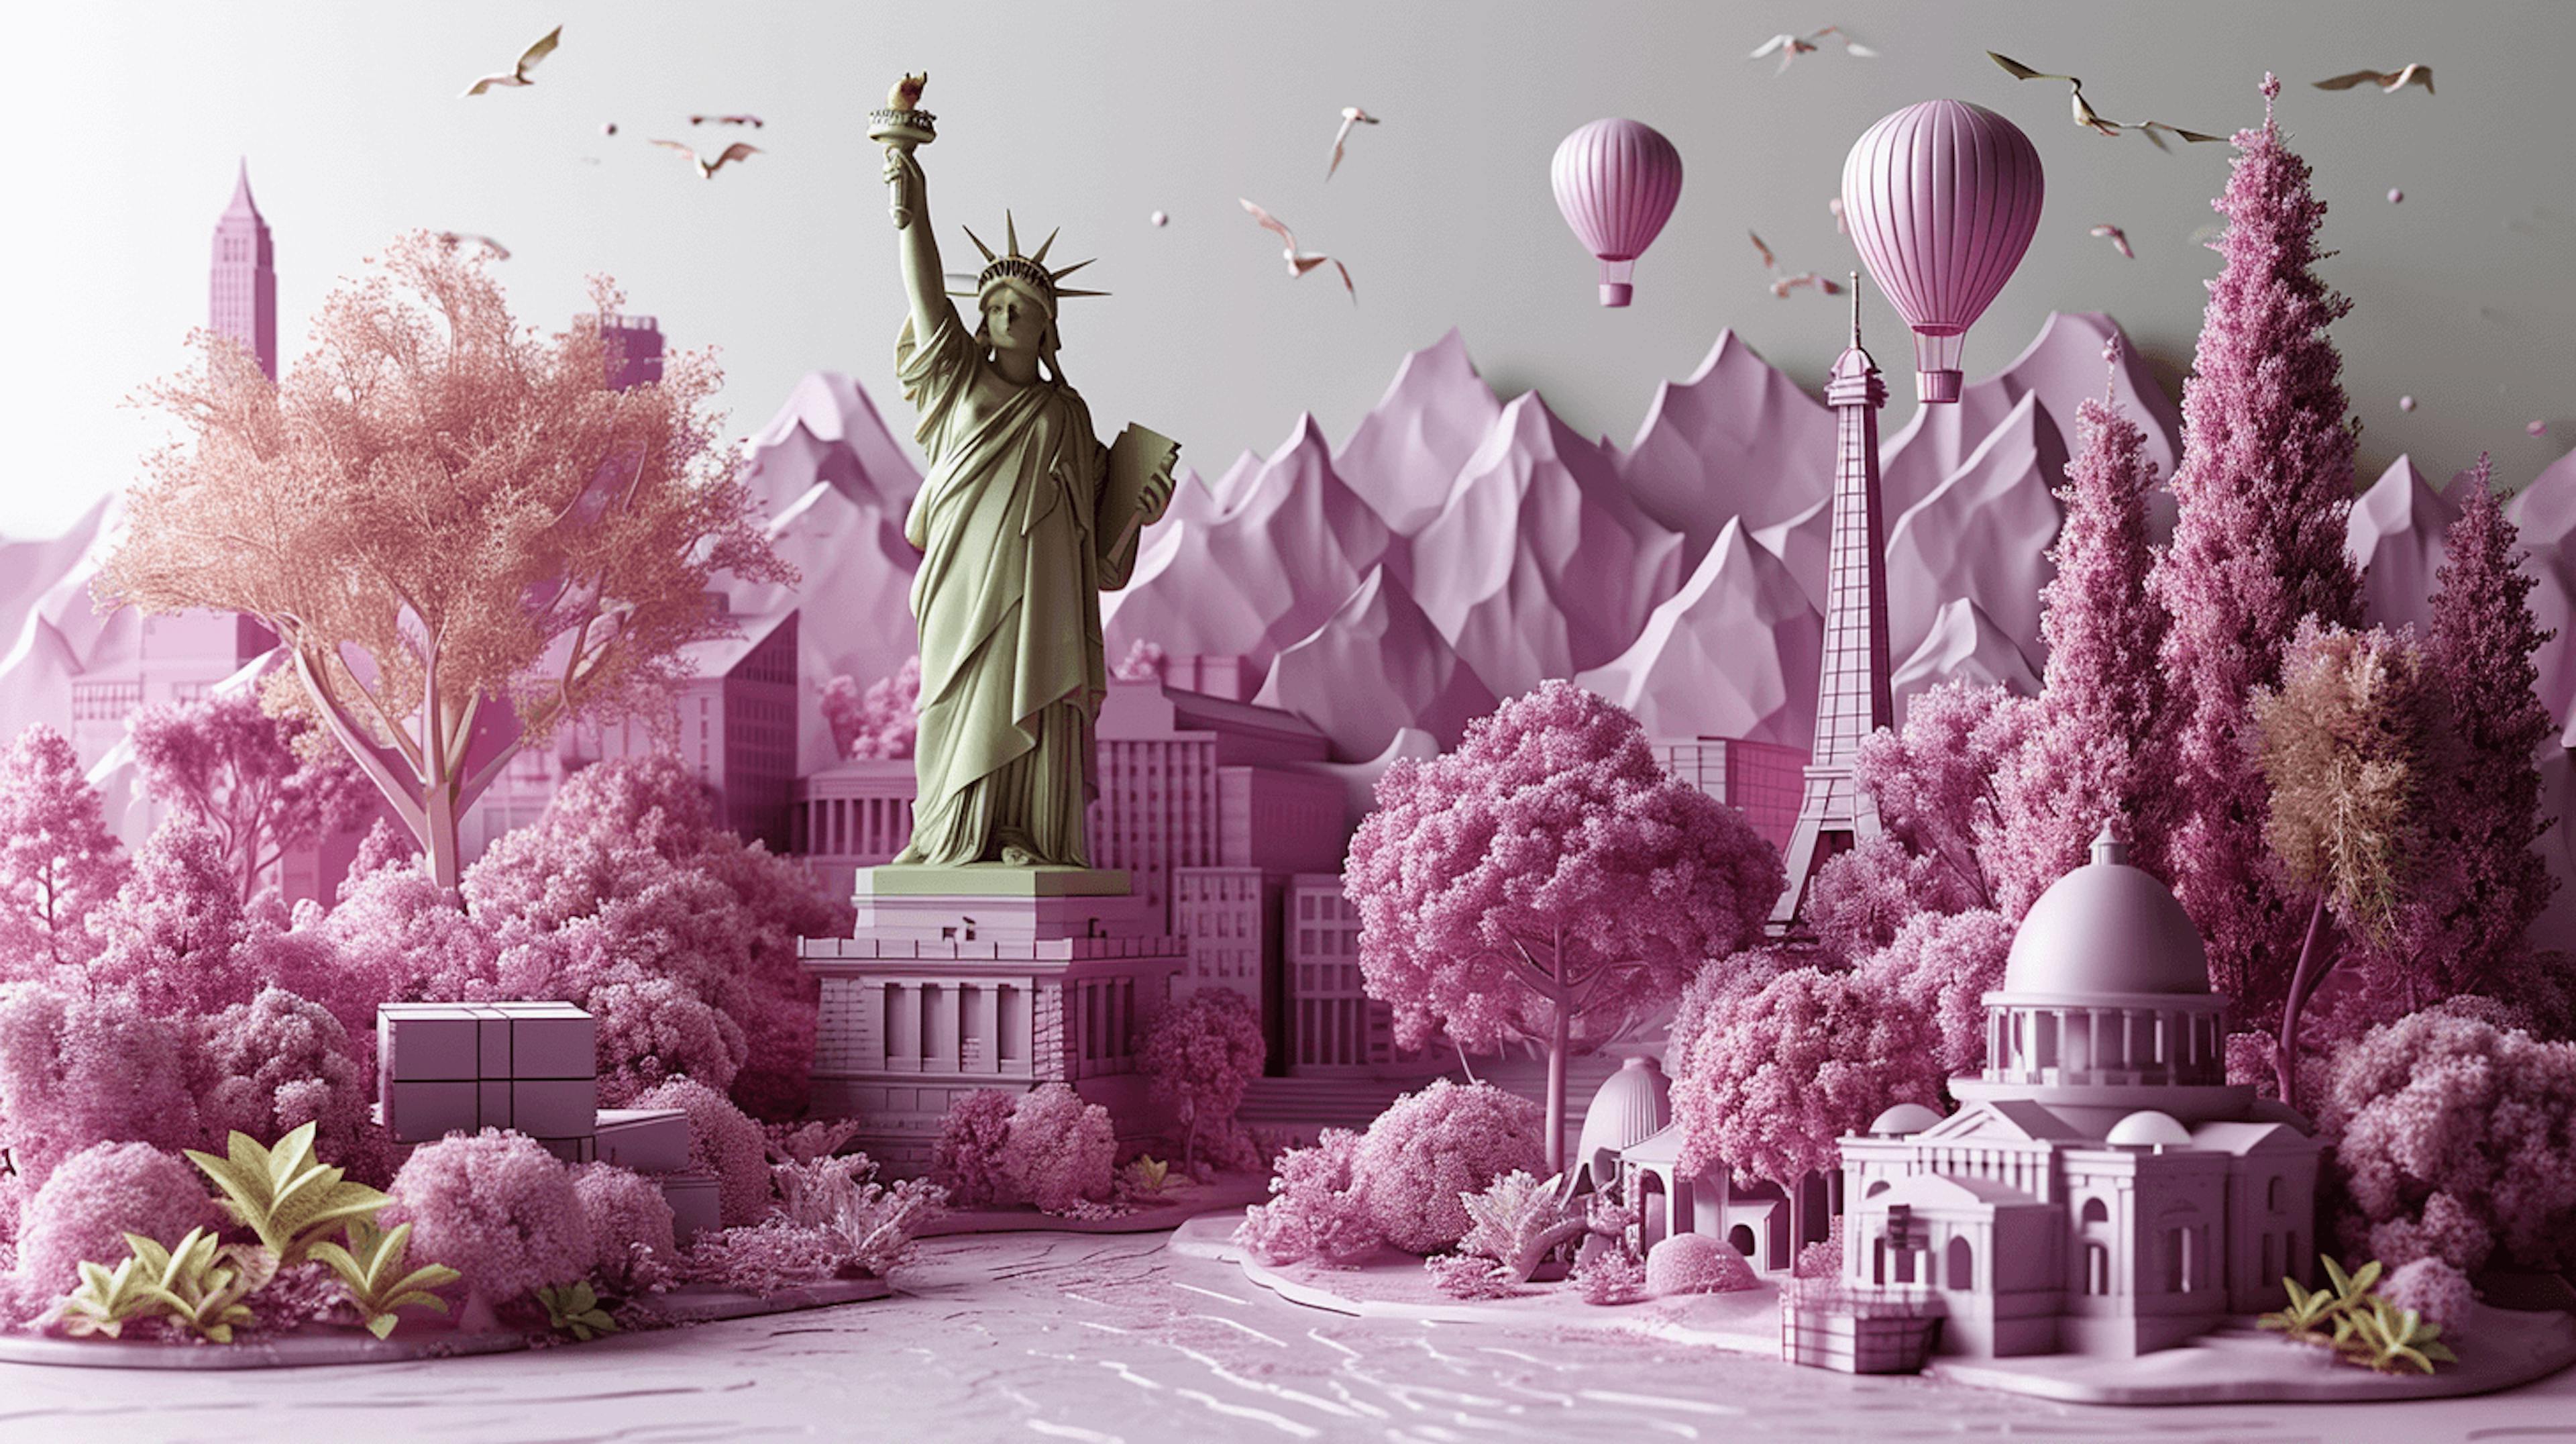 an image of a town with pink buildings and cars, in the style of surreal 3d landscapes, liberty statue in the US